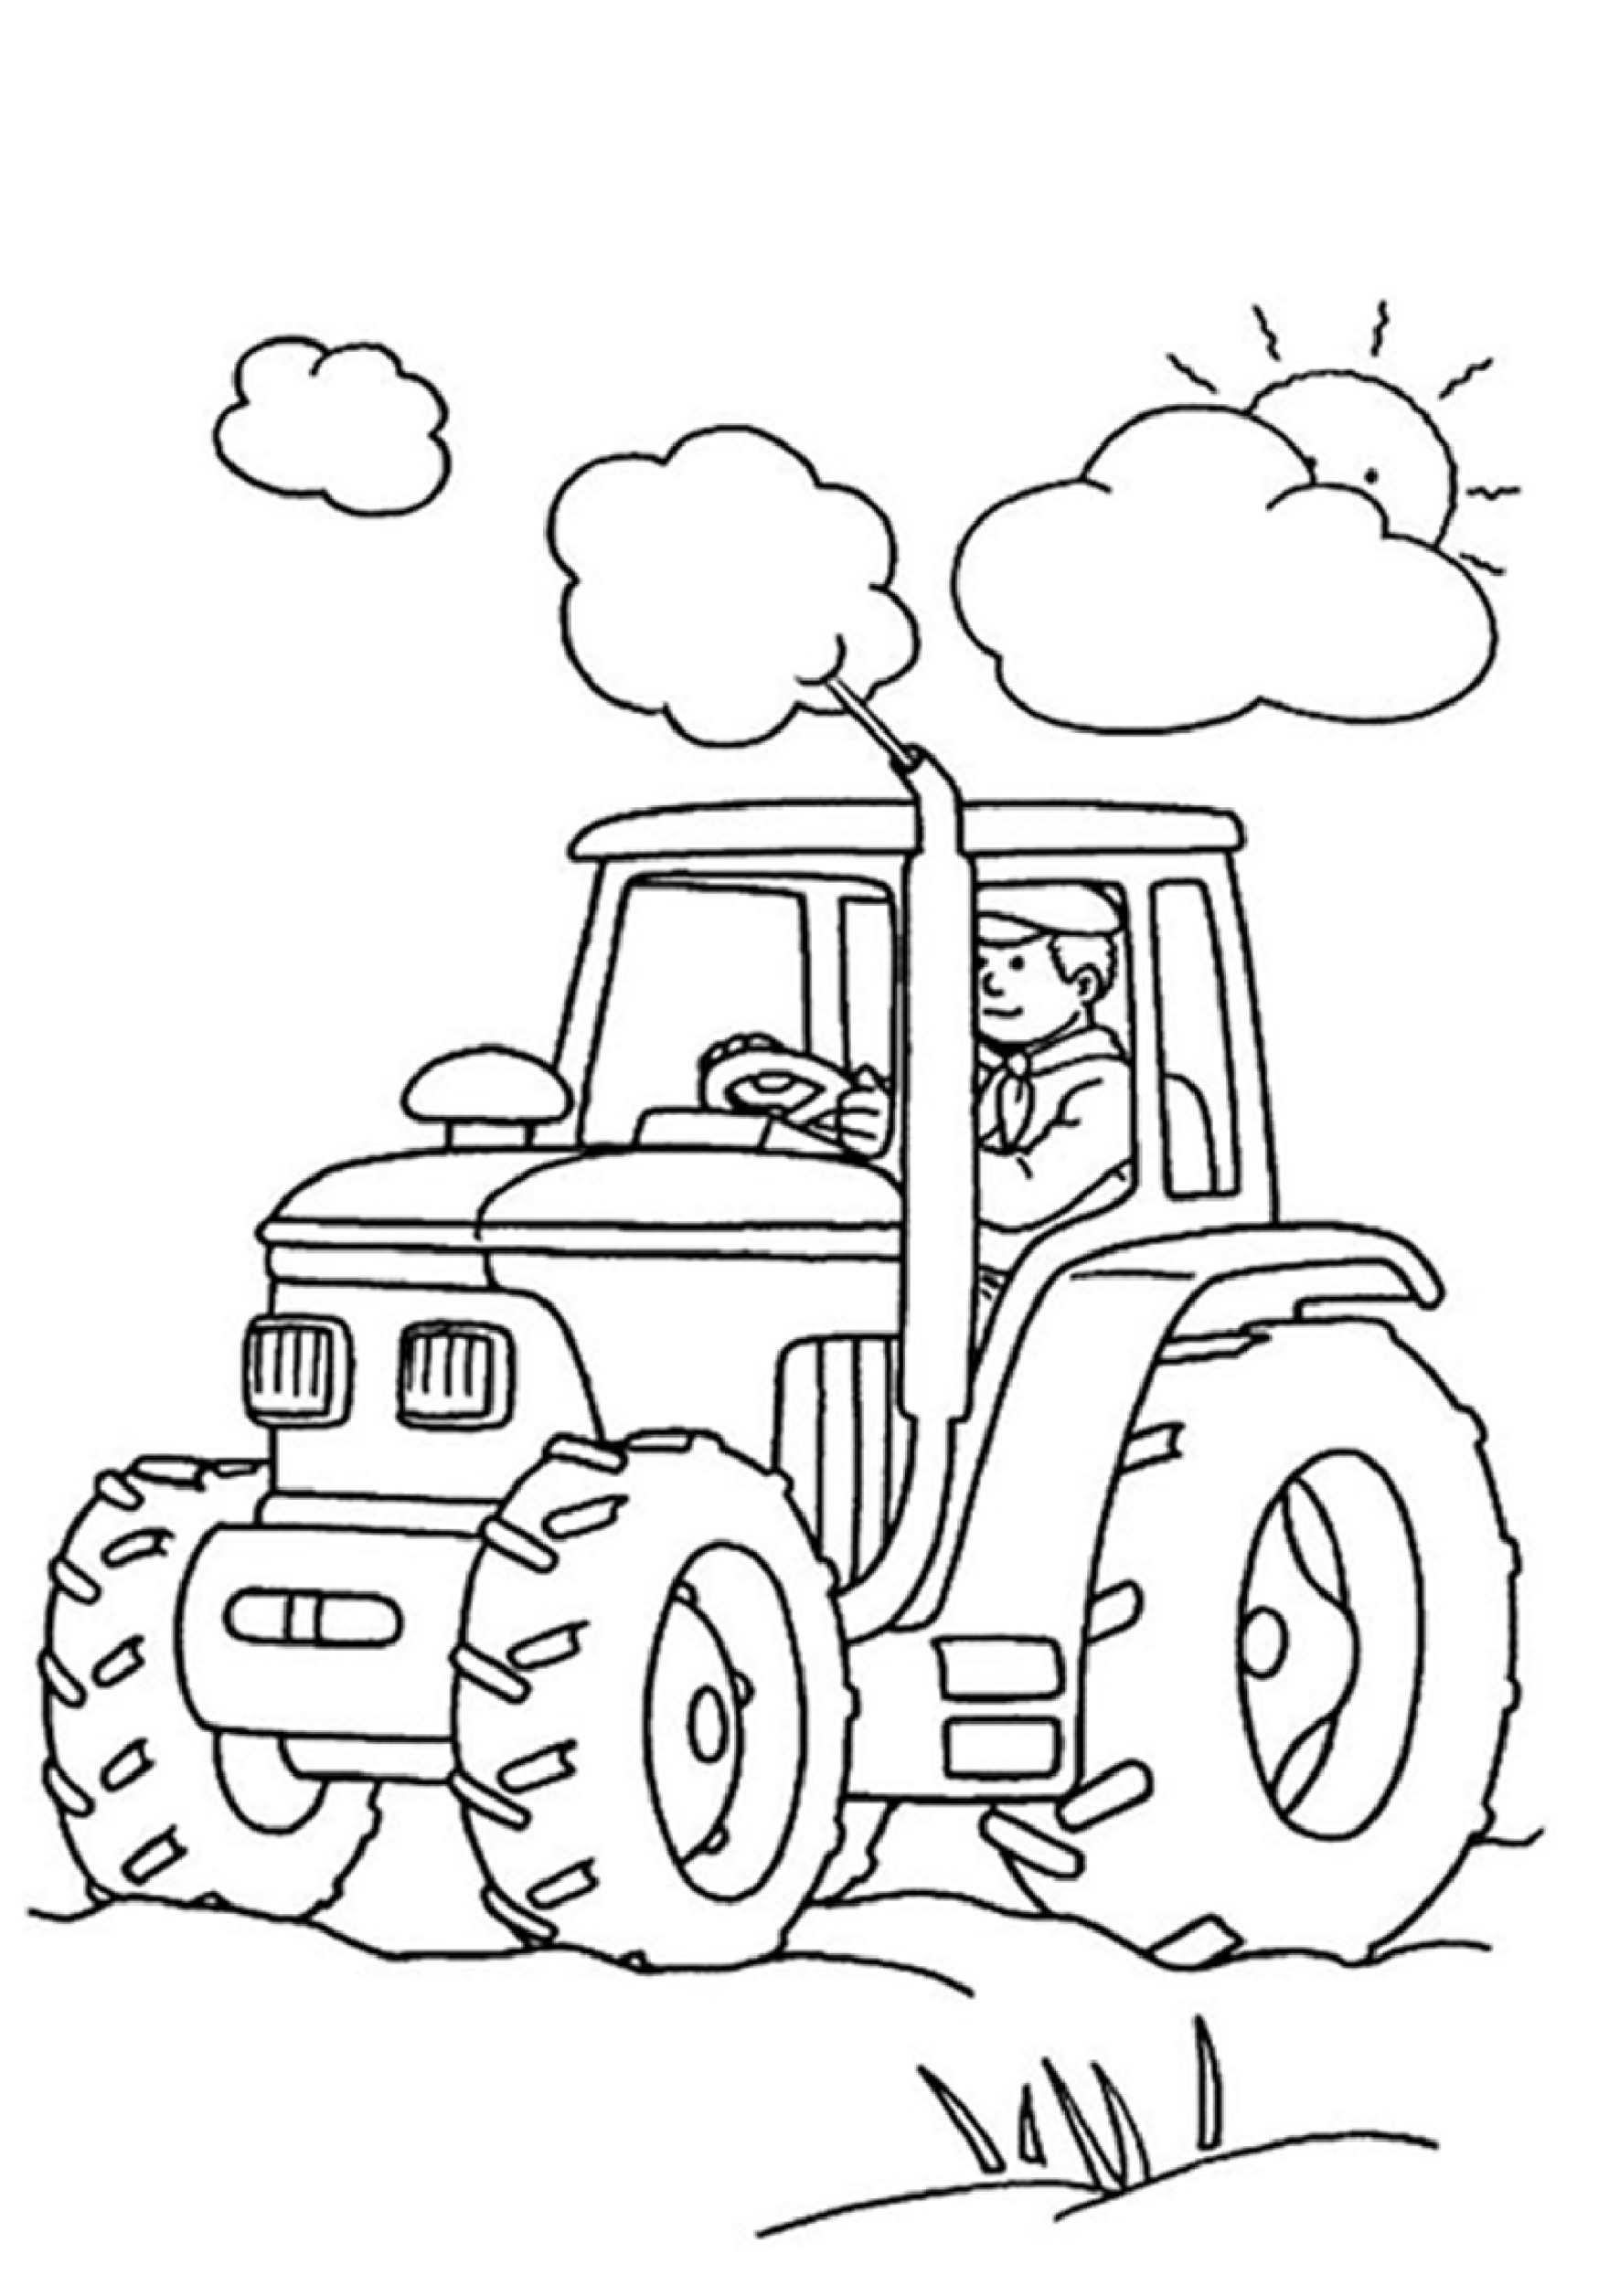 Kindergarten Coloring Pages For Boys
 46 Free Coloring Pages for Kindergarten Kids Gianfreda